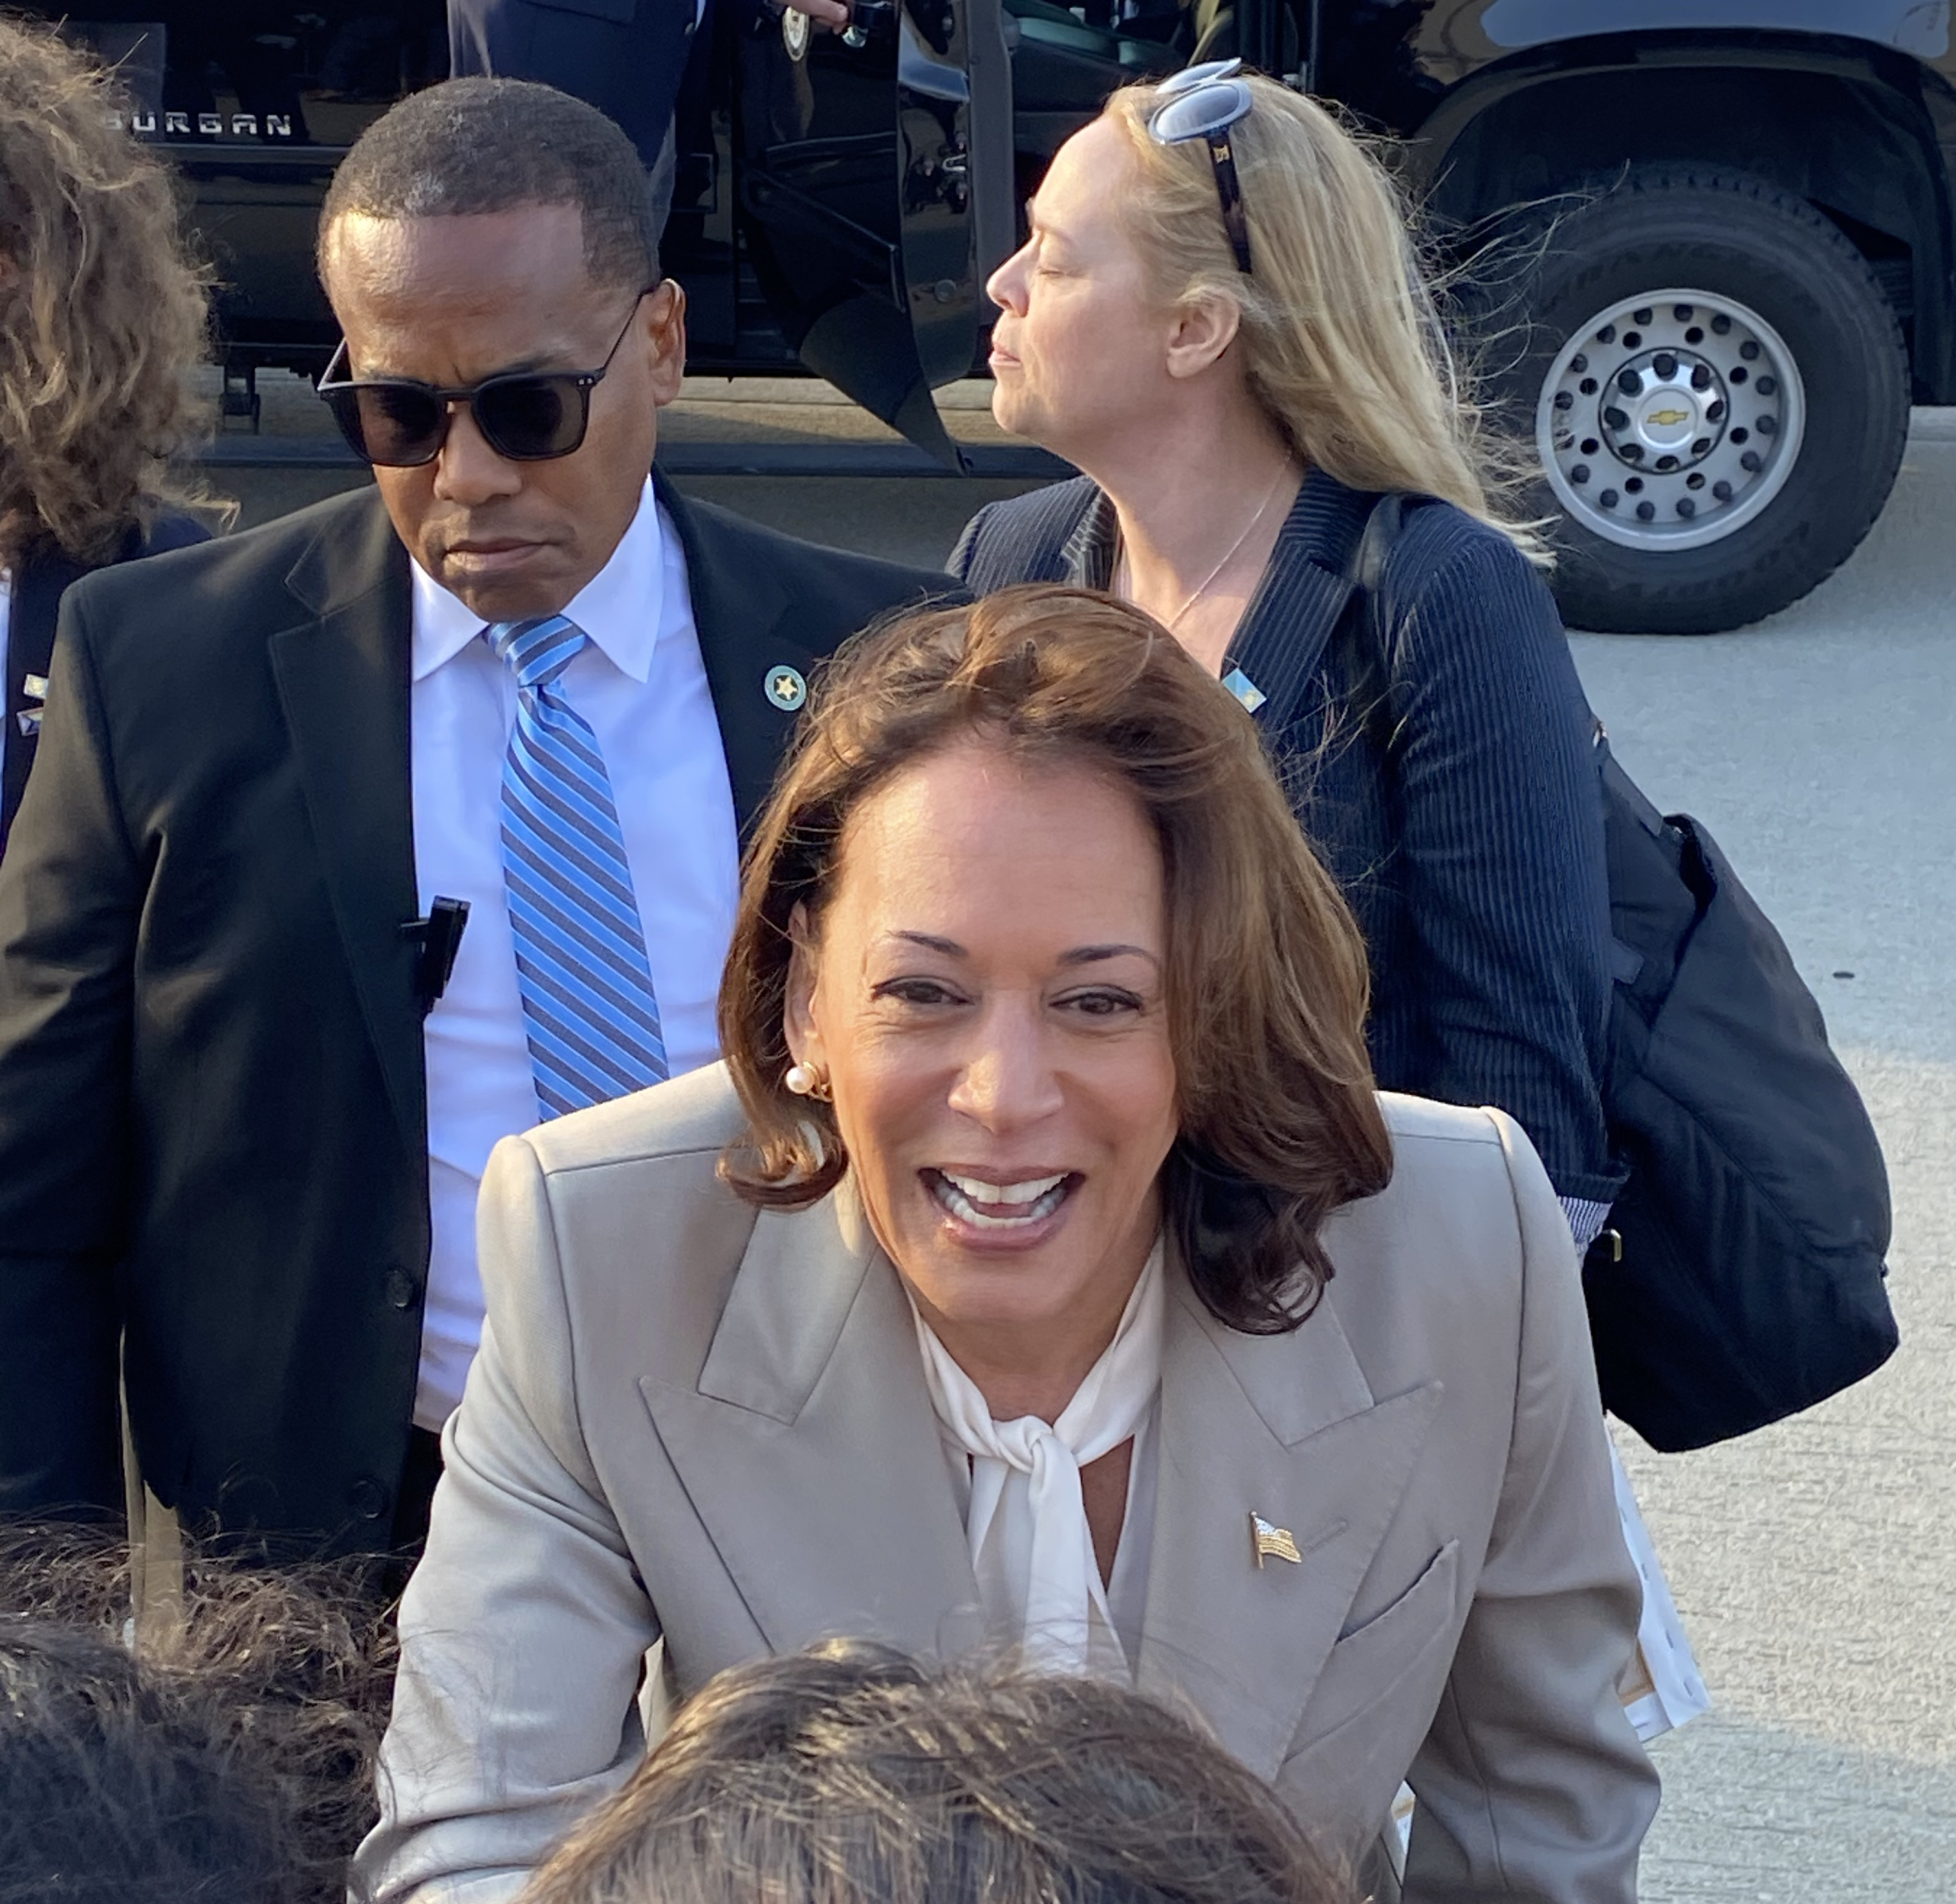 Kamala Harris, wearing a grey coat, outdoors shaking the hand of another person